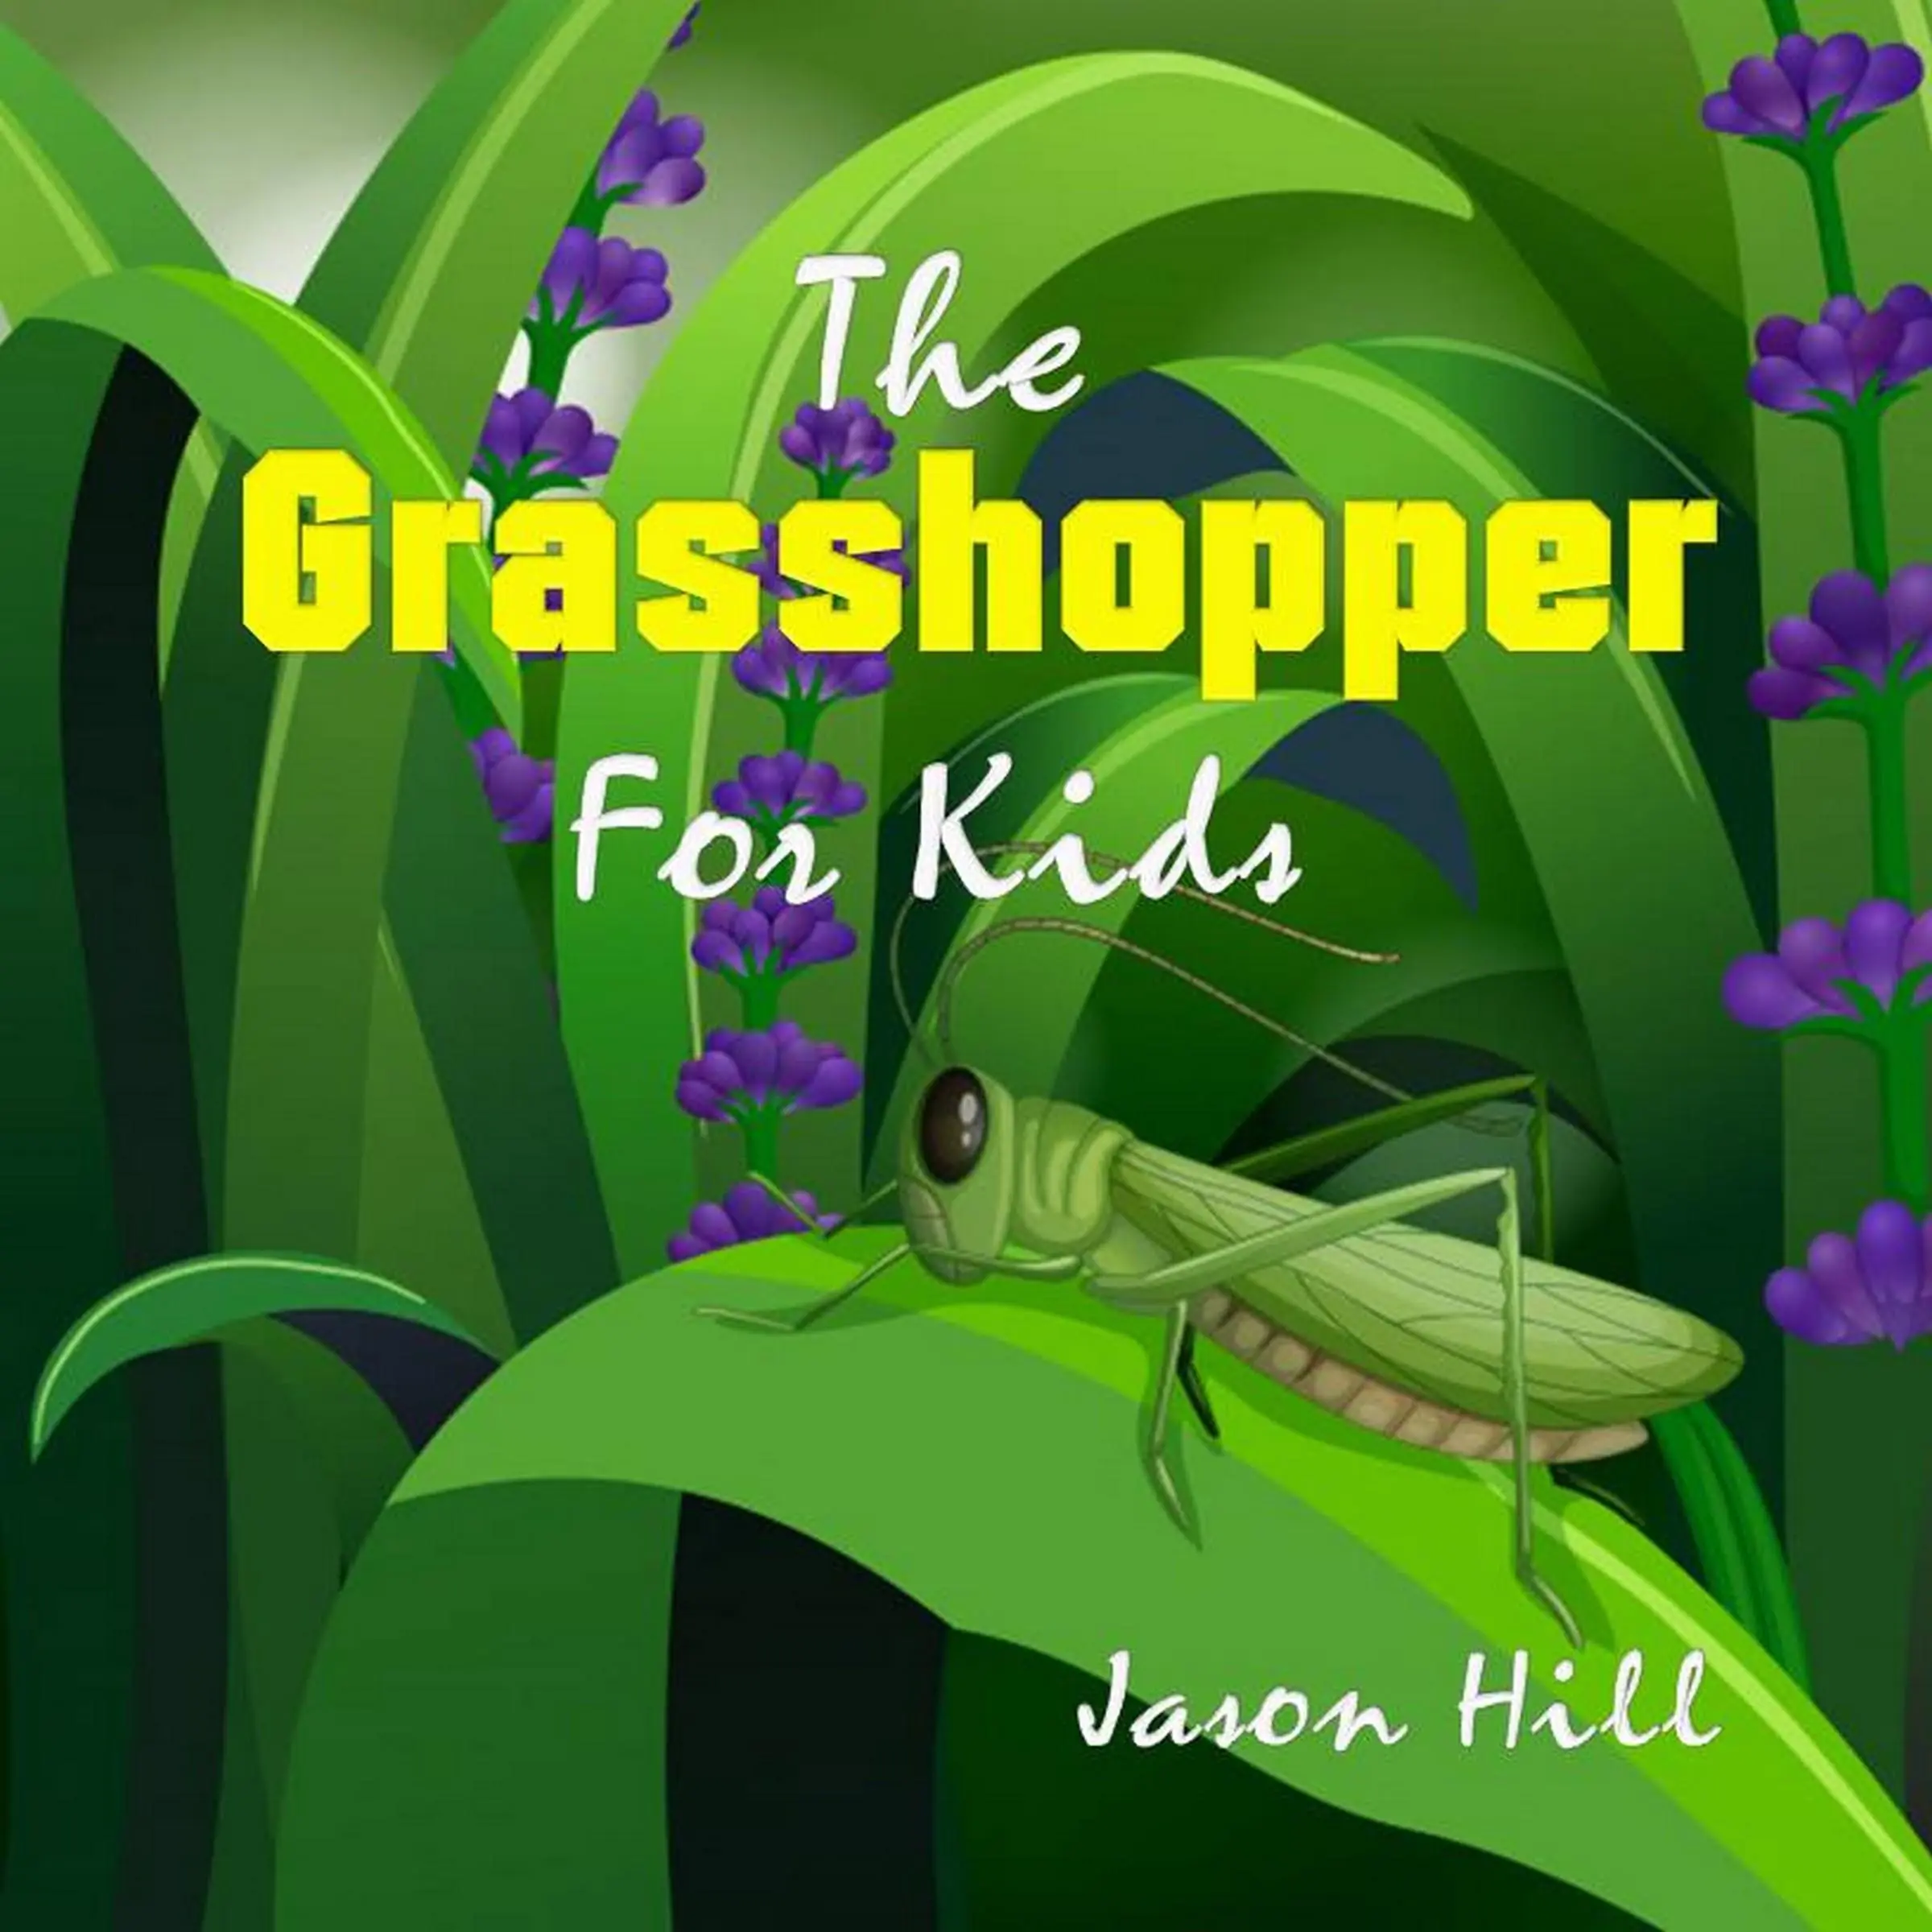 The Grasshopper for Kids Audiobook by Jason Hill